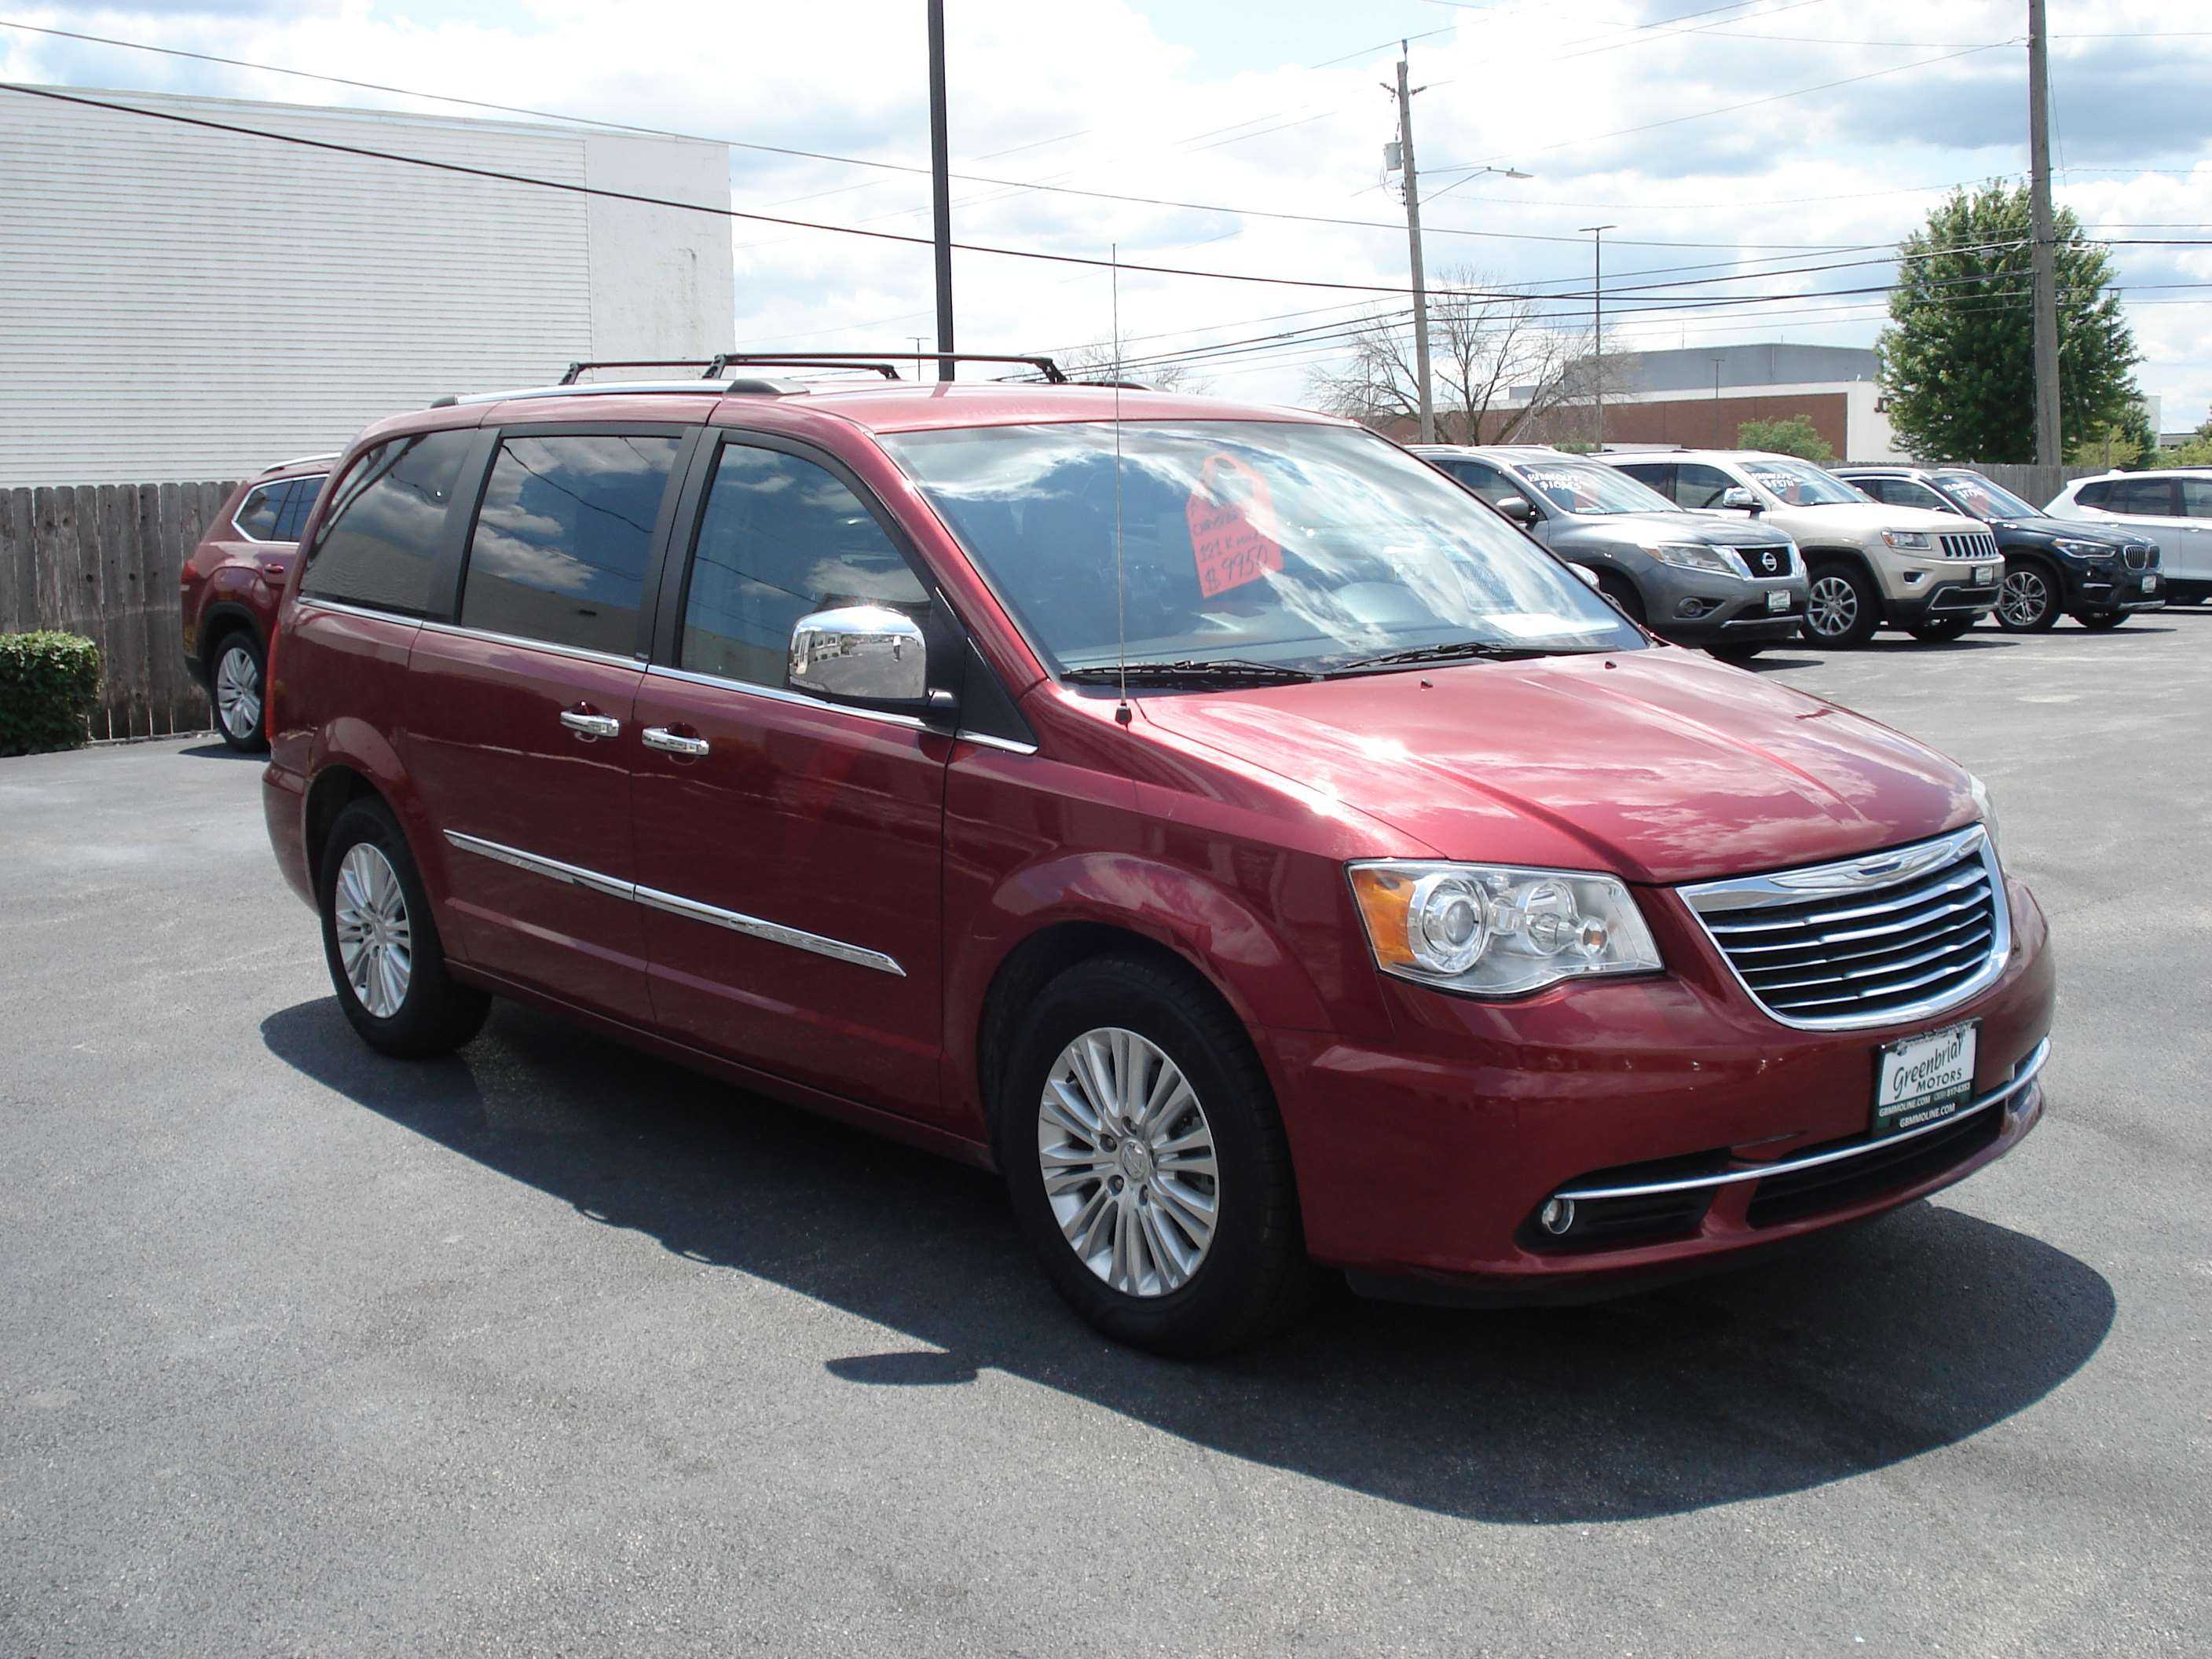 Chrysler Town And Country Image 4